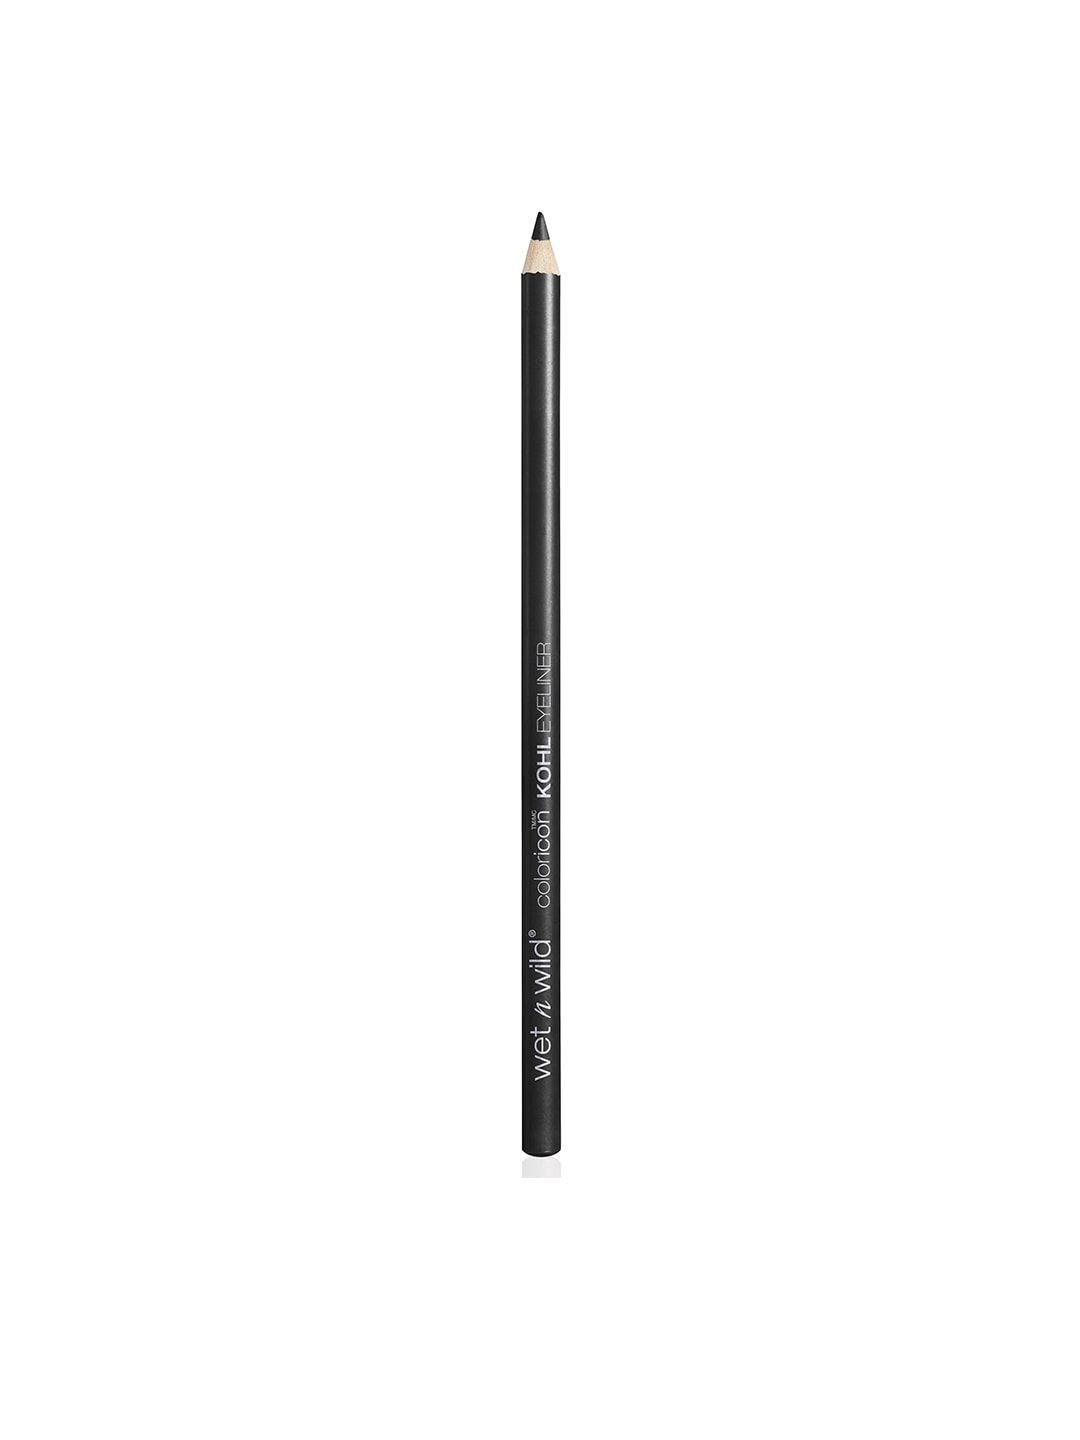 wet n wild color icon kohl liner pencil - baby's got black e601a 1.4 g